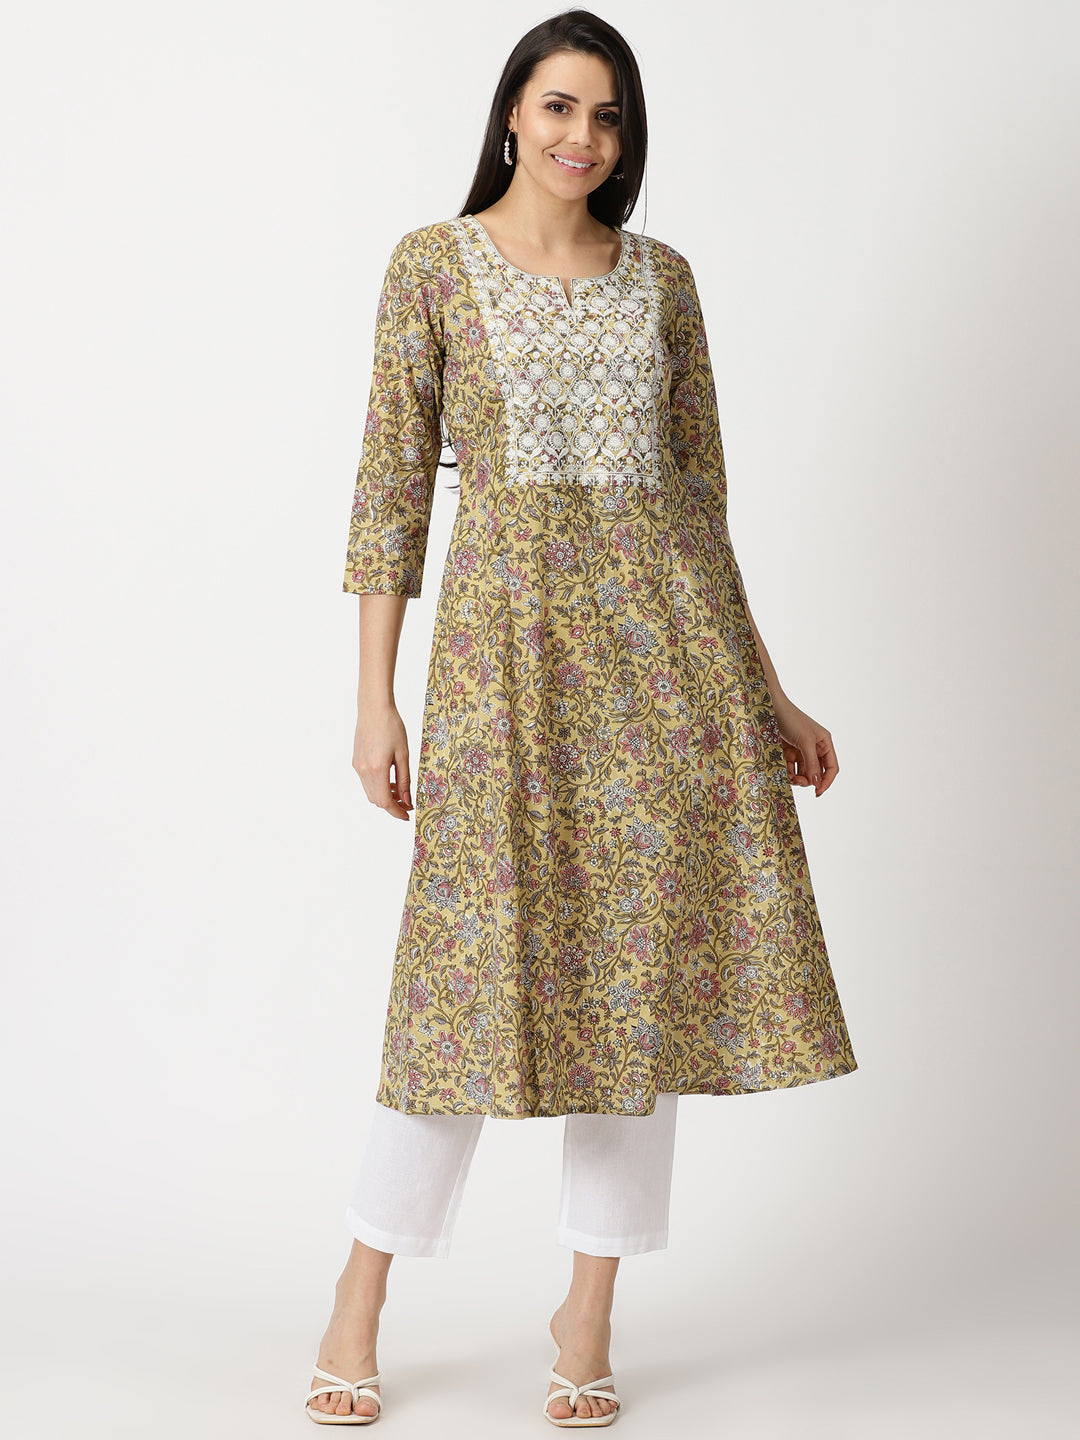 Yellow Floral Print A-line Kurta with Lucknowi Chikankari Embroidery